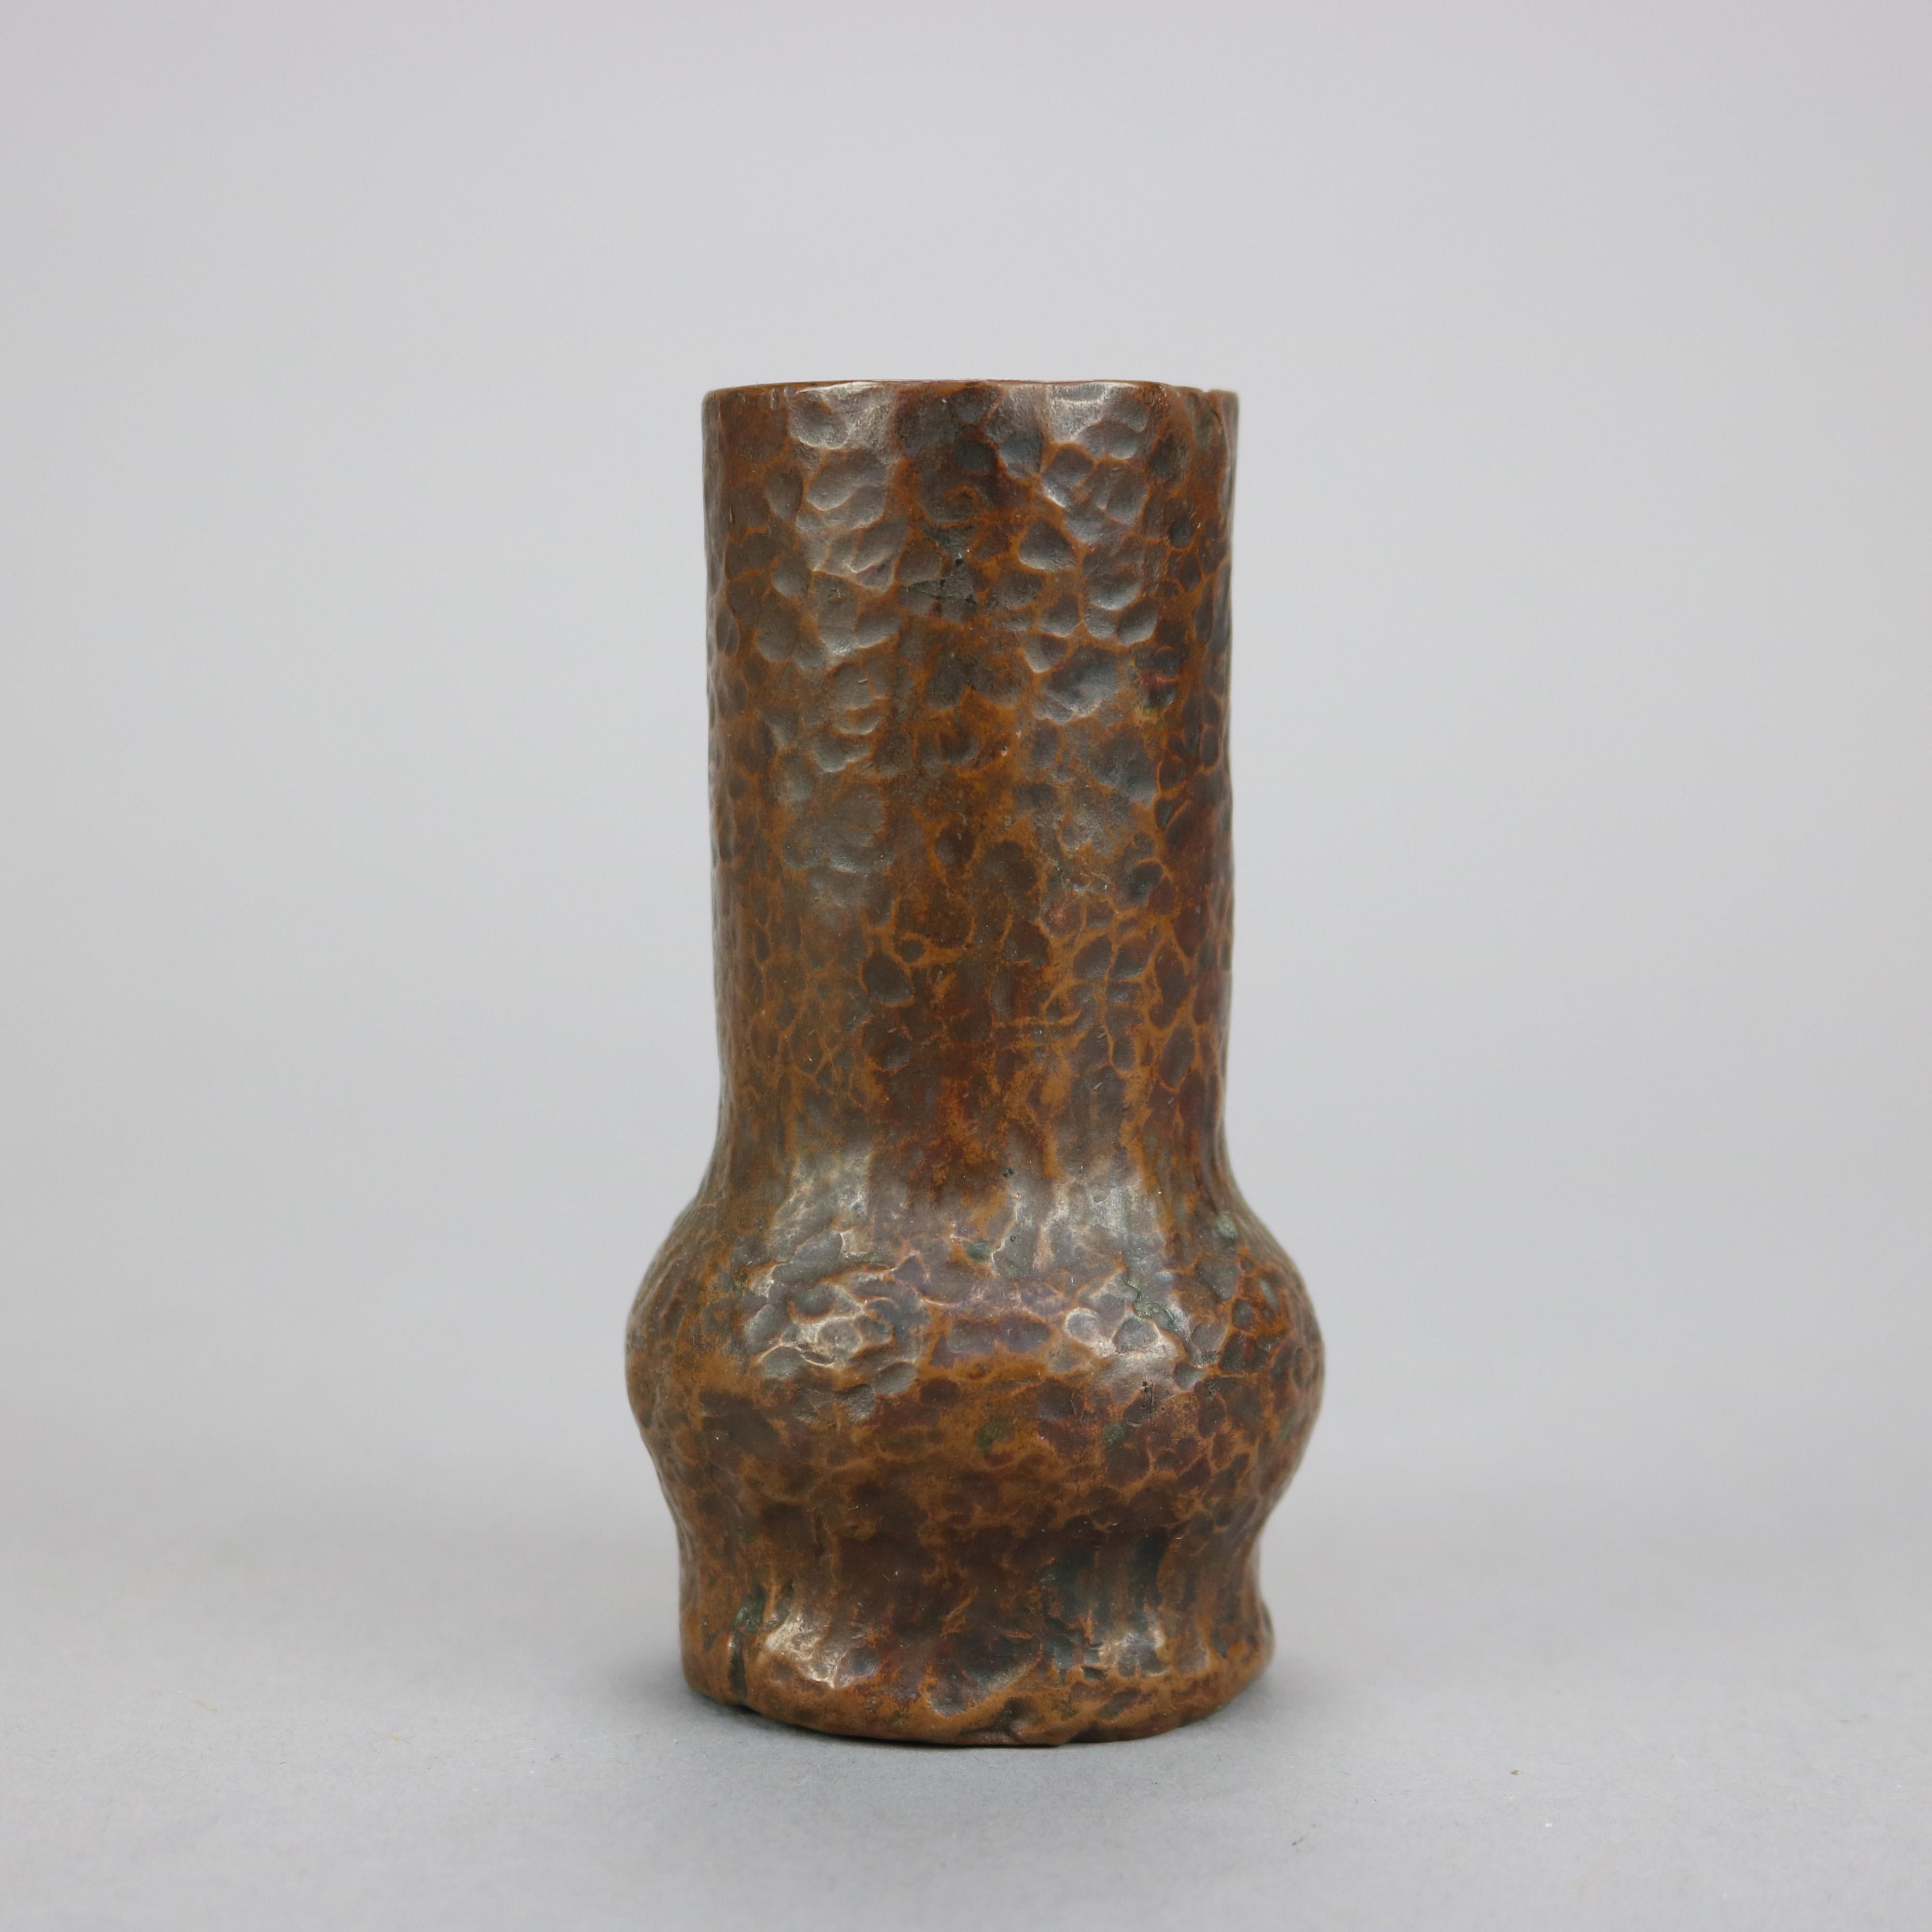 An Arts & Crafts cabinet vase offers hand hammered copper construction in cylinder form, c1910

Measures - 4''H X 2.25''W X 2.25''D.

Catalogue Note: Ask about DISCOUNTED DELIVERY RATES available to most regions within 1,500 miles of New York.